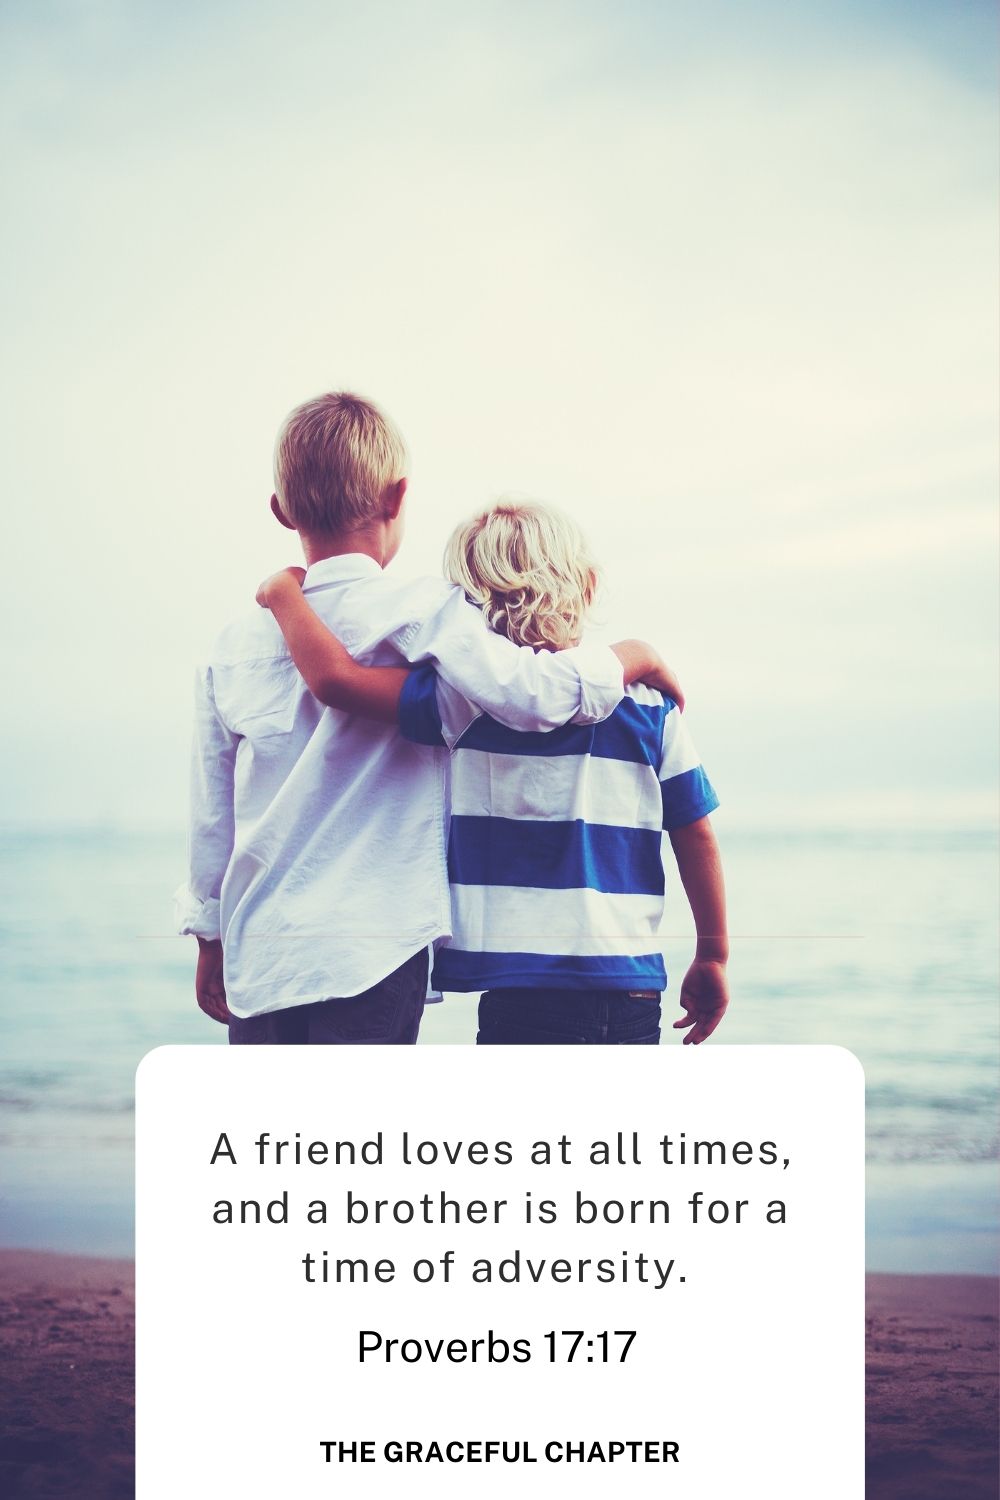 A friend loves at all times, and a brother is born for a time of adversity. 
Proverbs 17:17